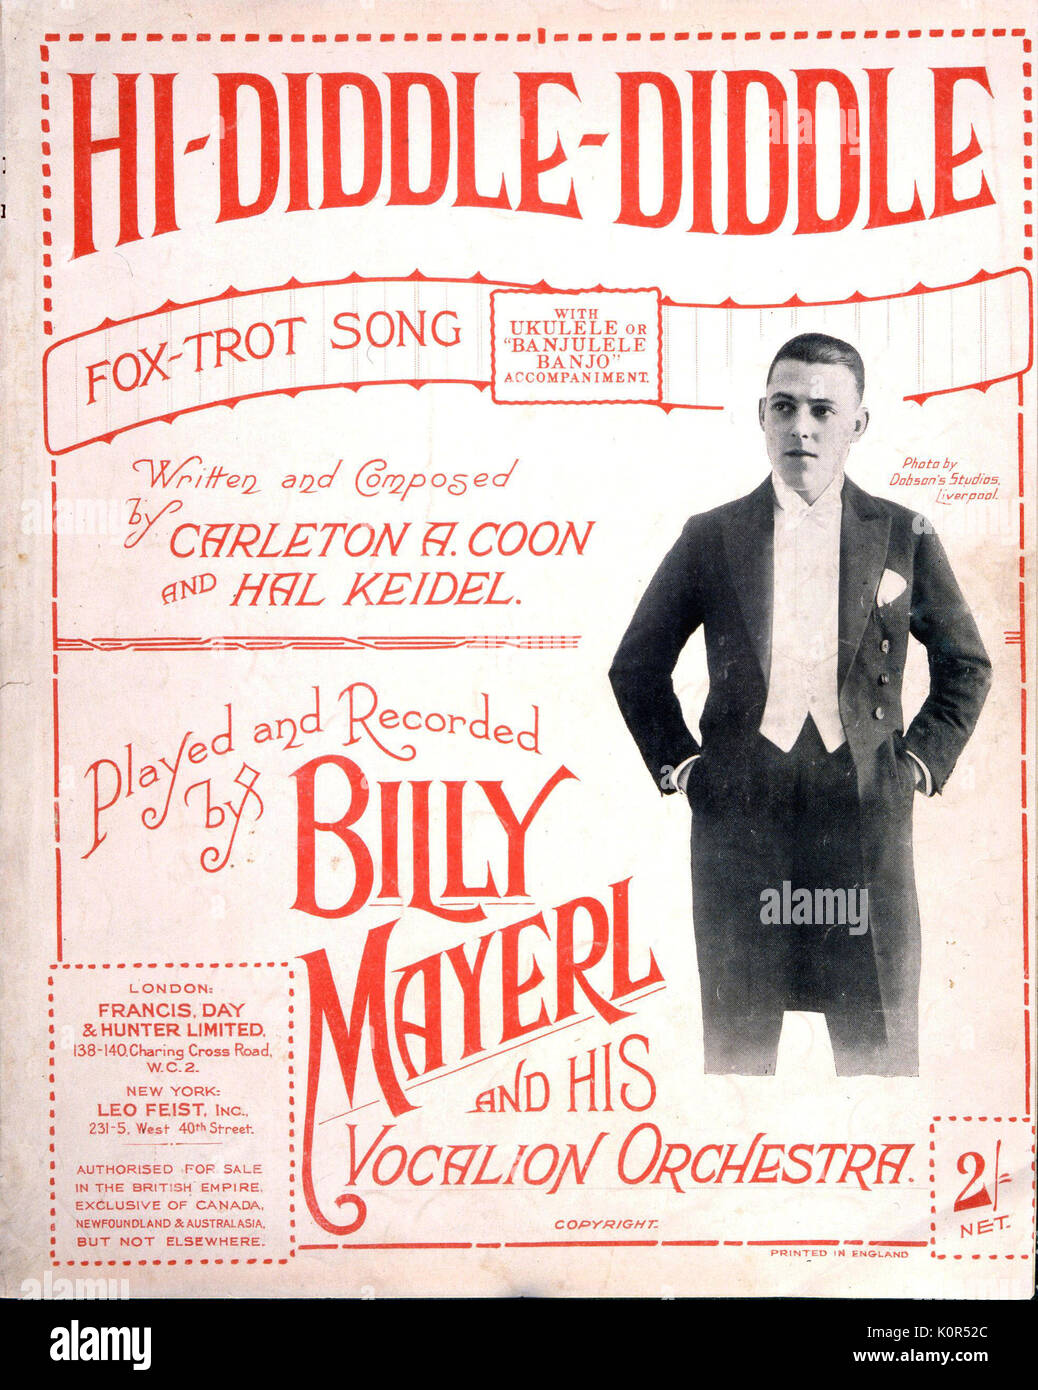 Mayerl, Billy - photo on score cover 'Hi Diddle Diddle'. Foxtrot song  Banjo / Ukulele accompaniment. 'Played & Recorded by Billy Mayerl with his Vocalion Orchestra'. British Pianist, Composer & Conductor.      Jazz 1902-1959. Stock Photo